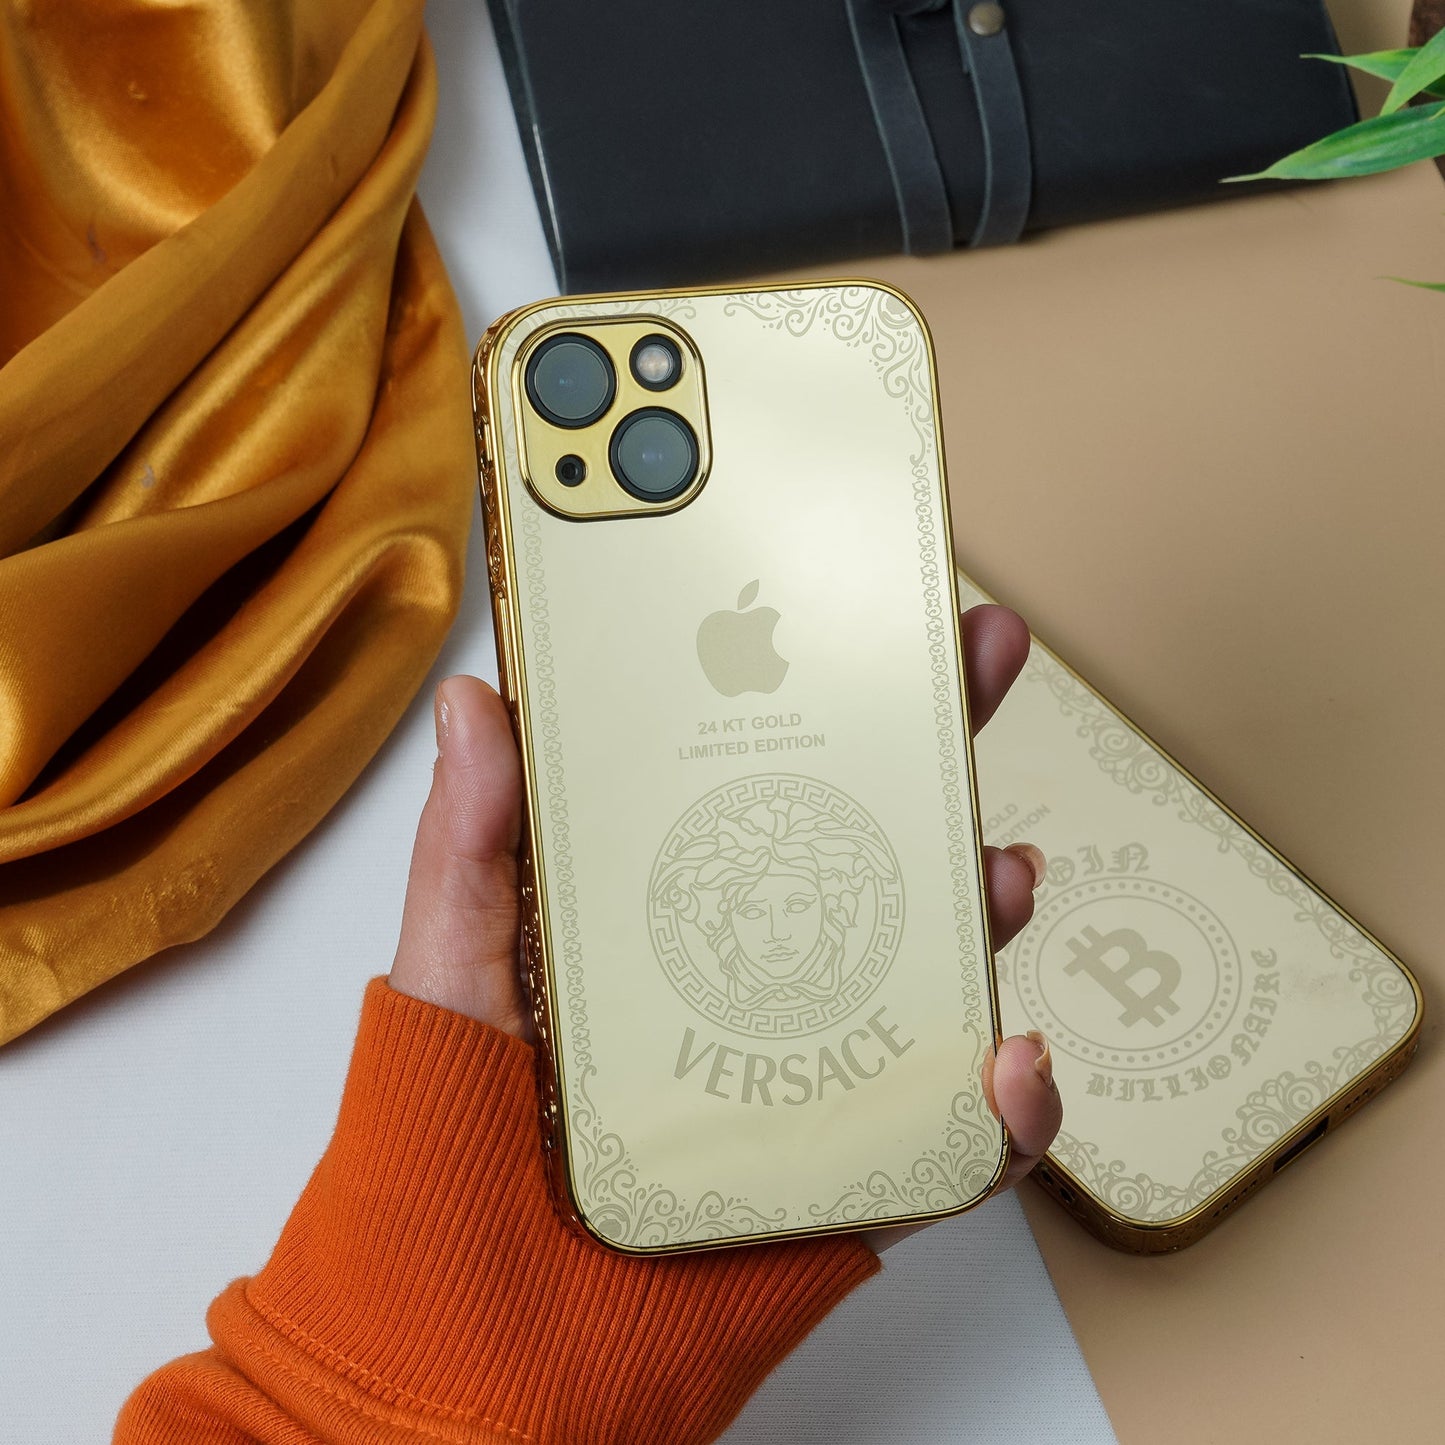 Crafted Gold Luxurious Camera Protective Case - iPhone